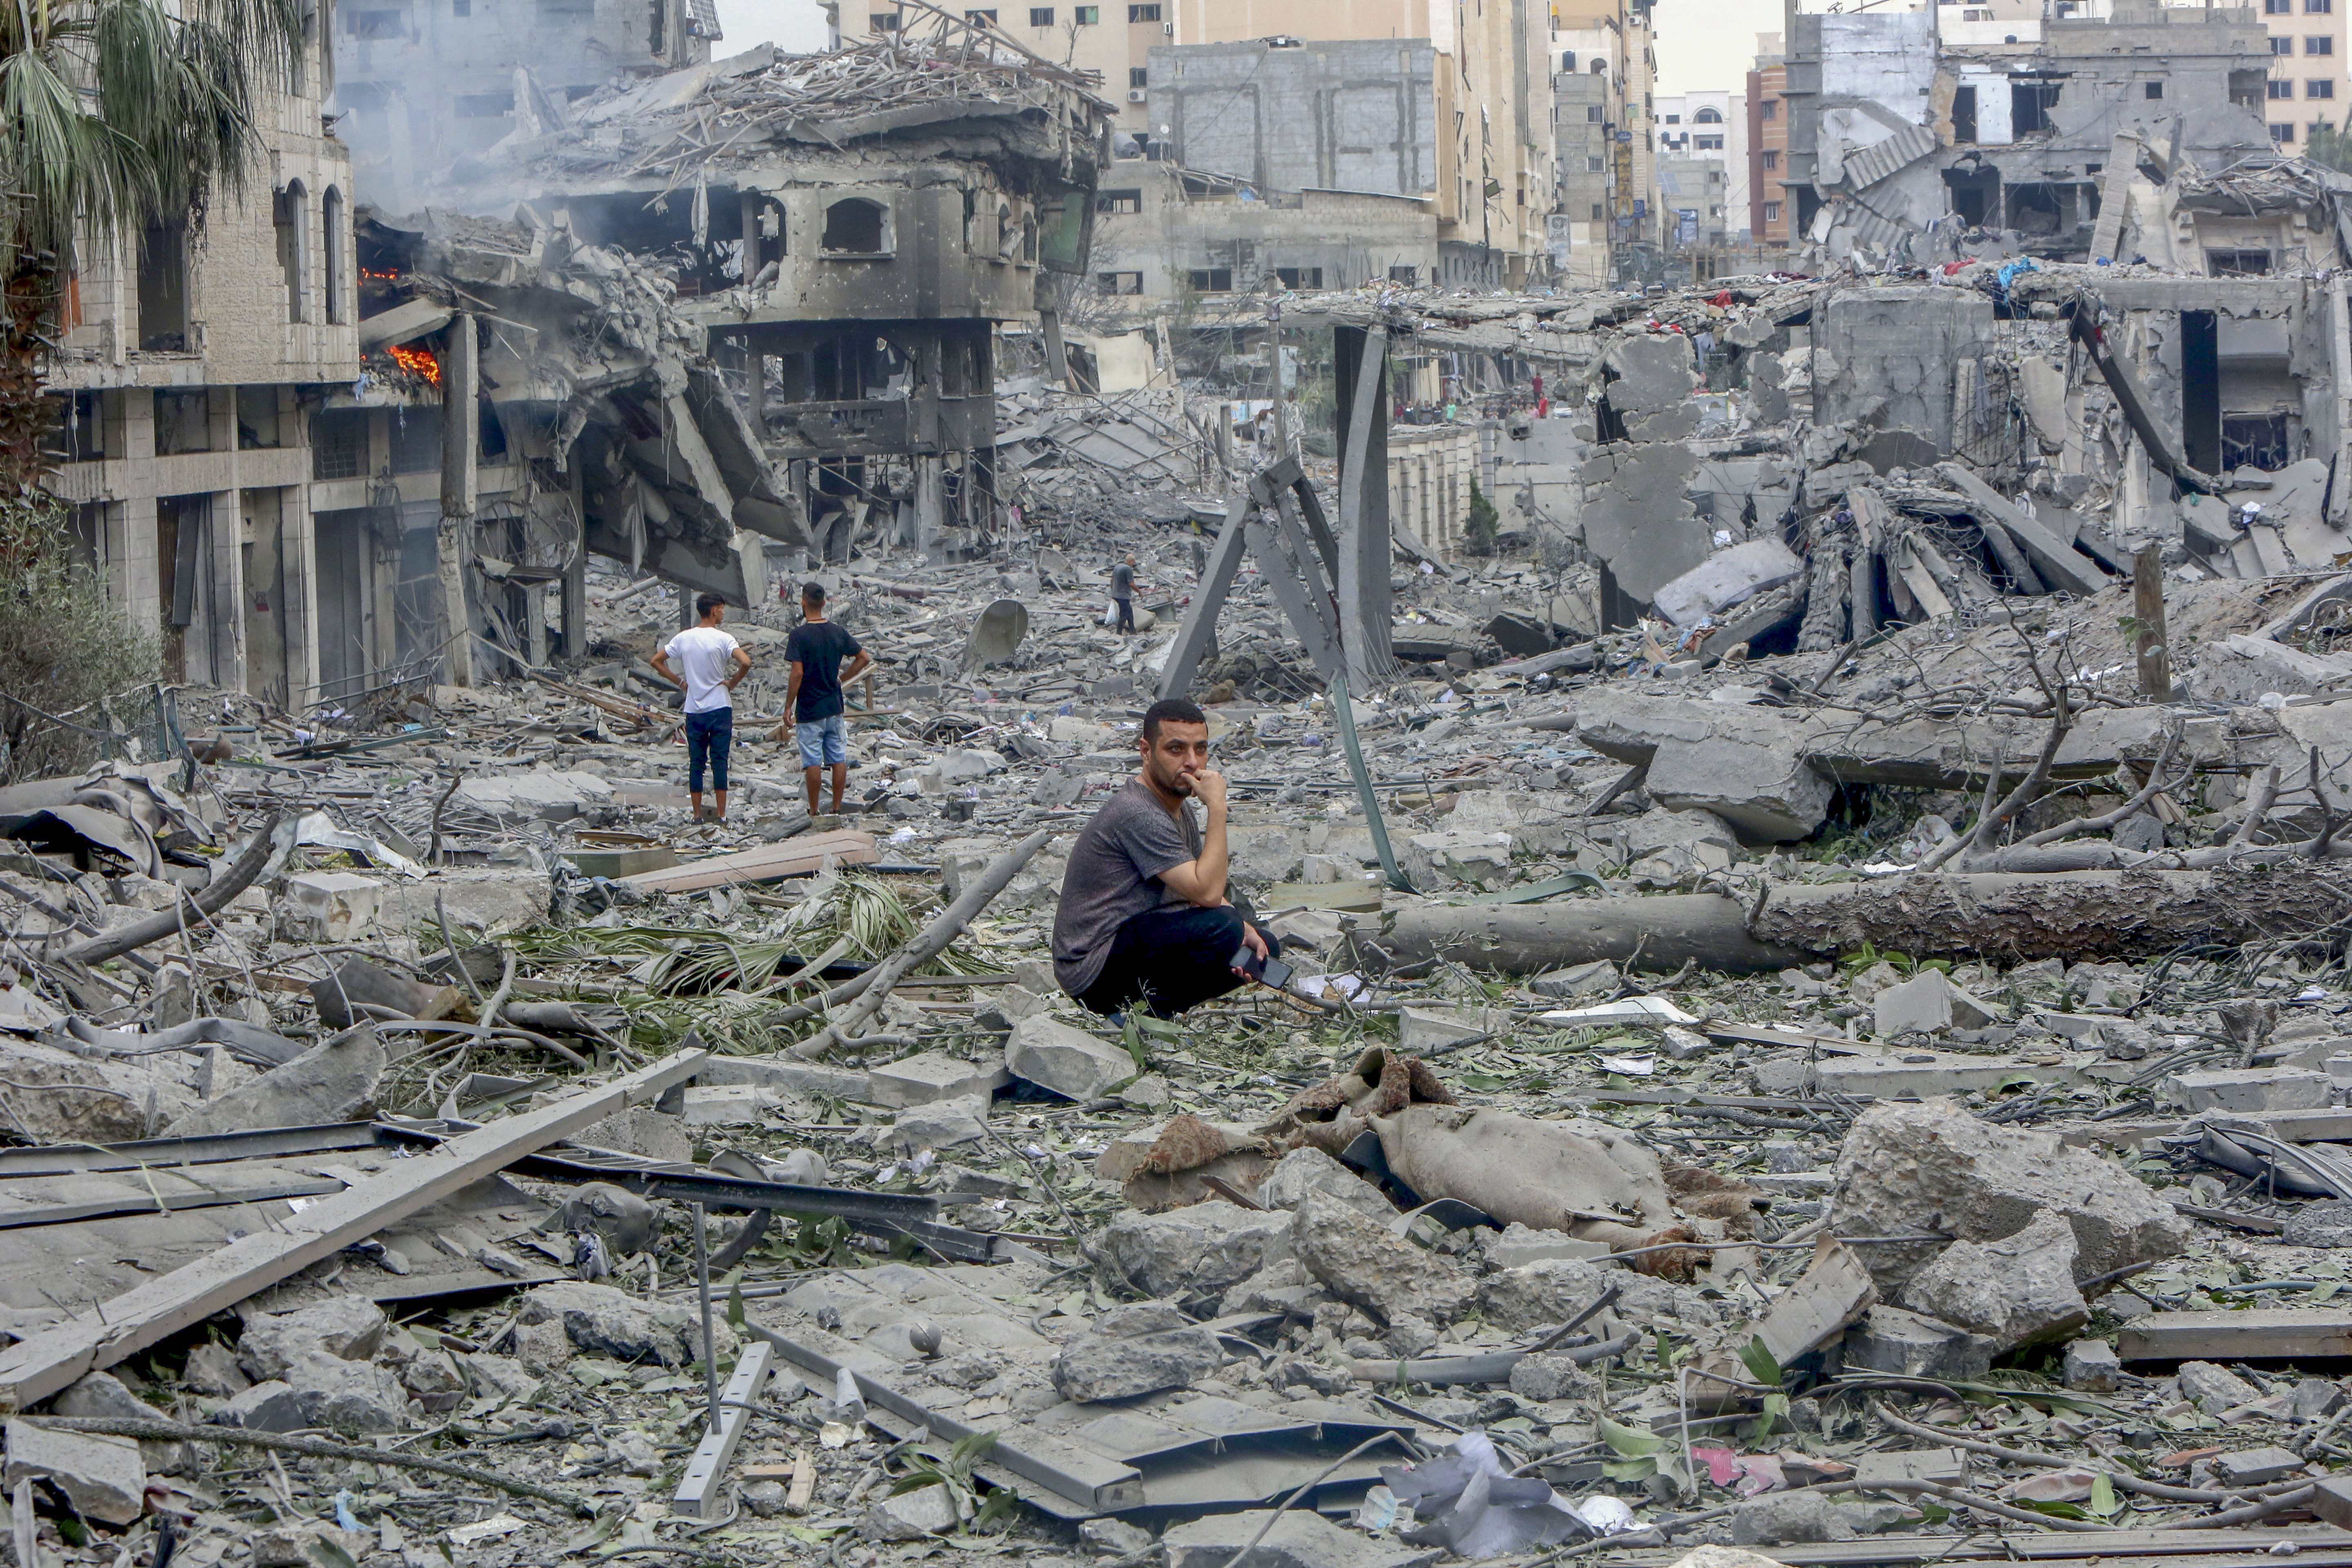 Pictured: Destruction in Gaza City’s Al-Remal neighborhood. Photo credits: ©Eyad Baba for Mercy Corps